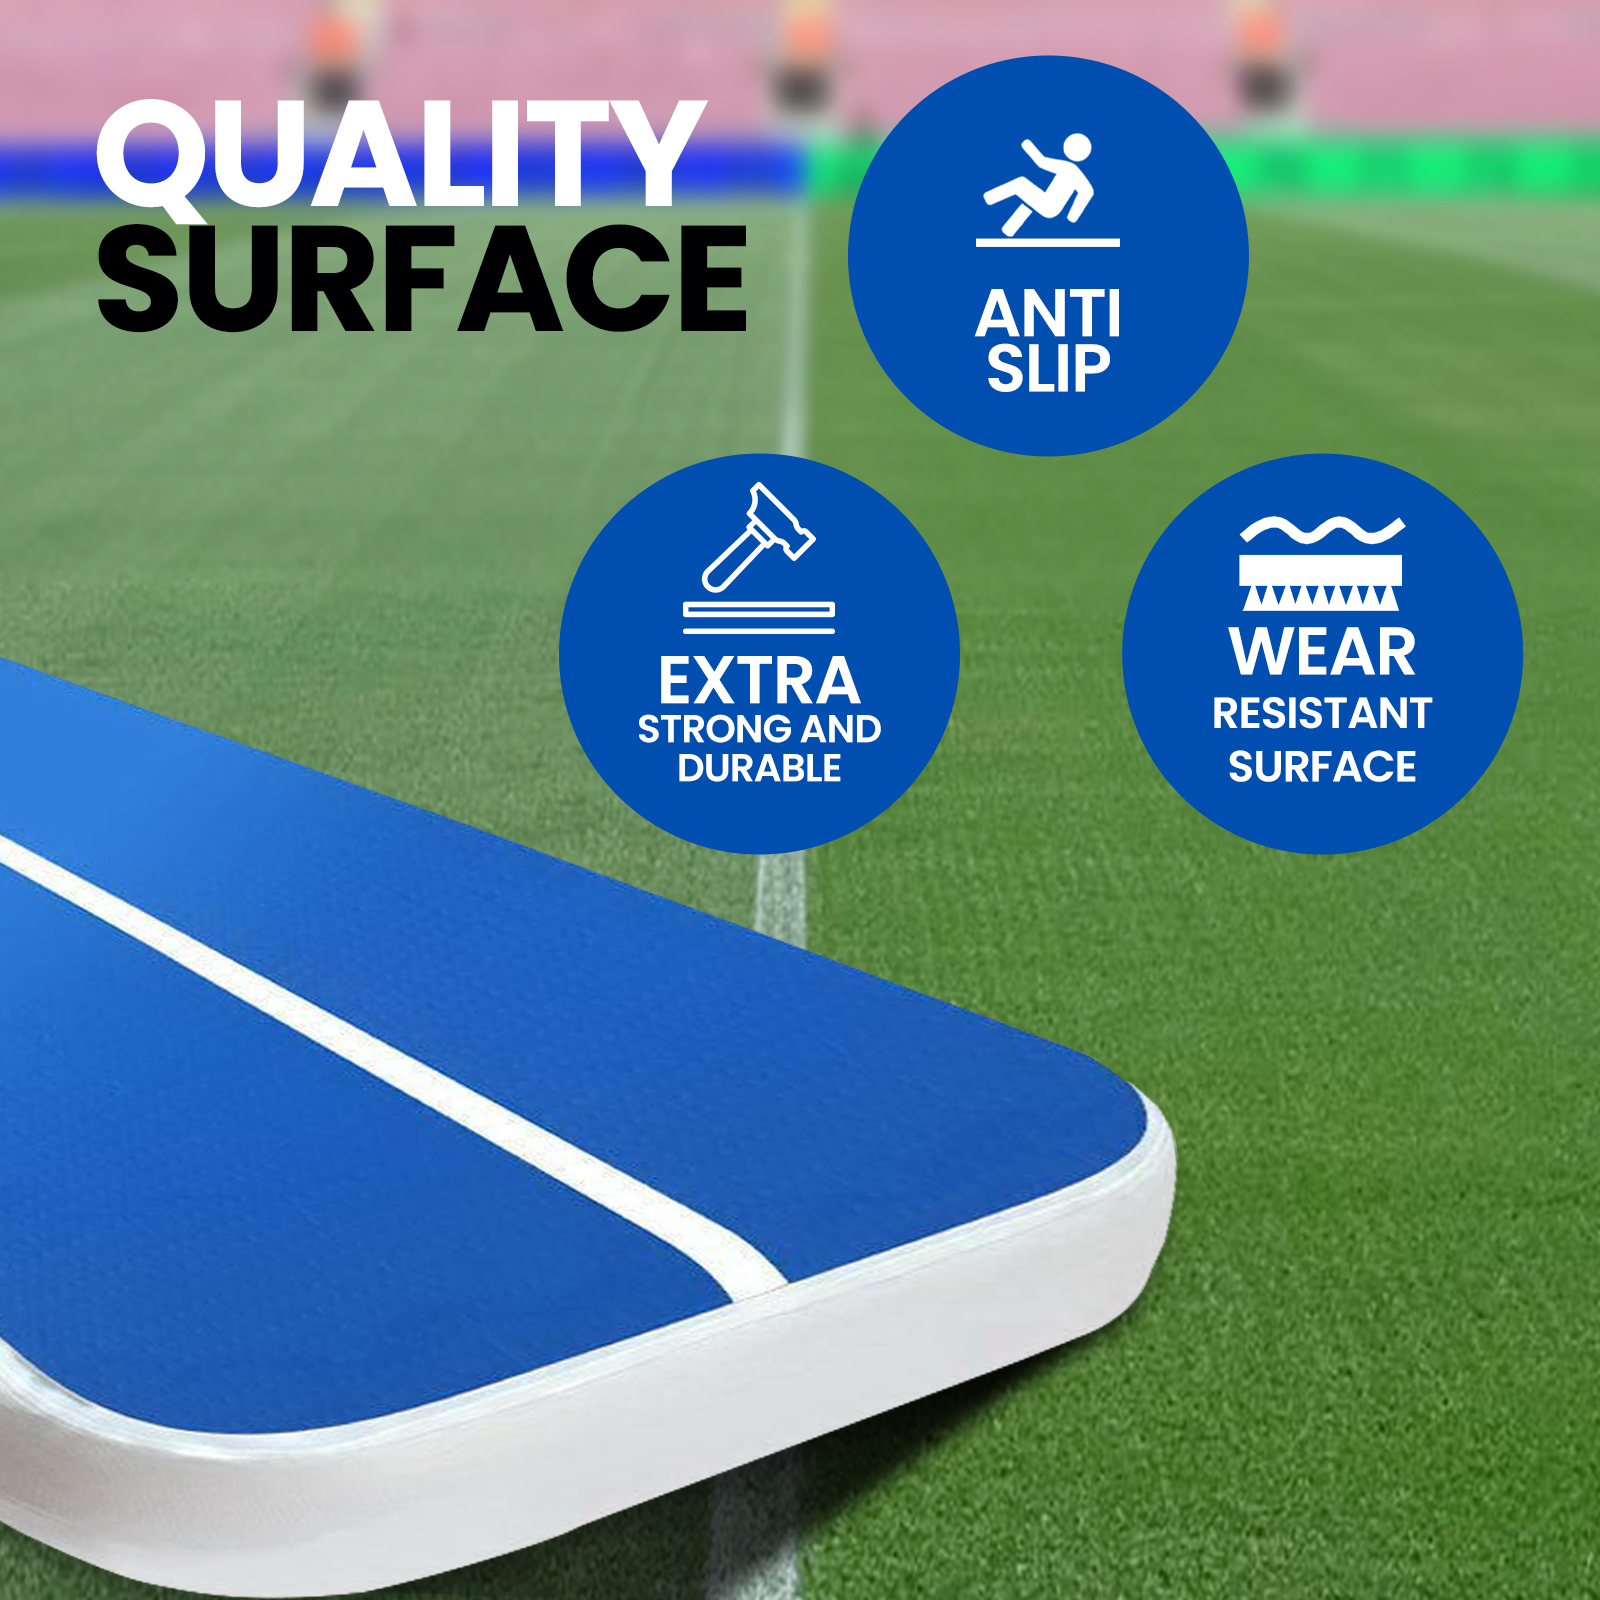 Inflatable Air Track Mat 20CM Thick with Pump Tumbling Gymnastics Blue 6X1M